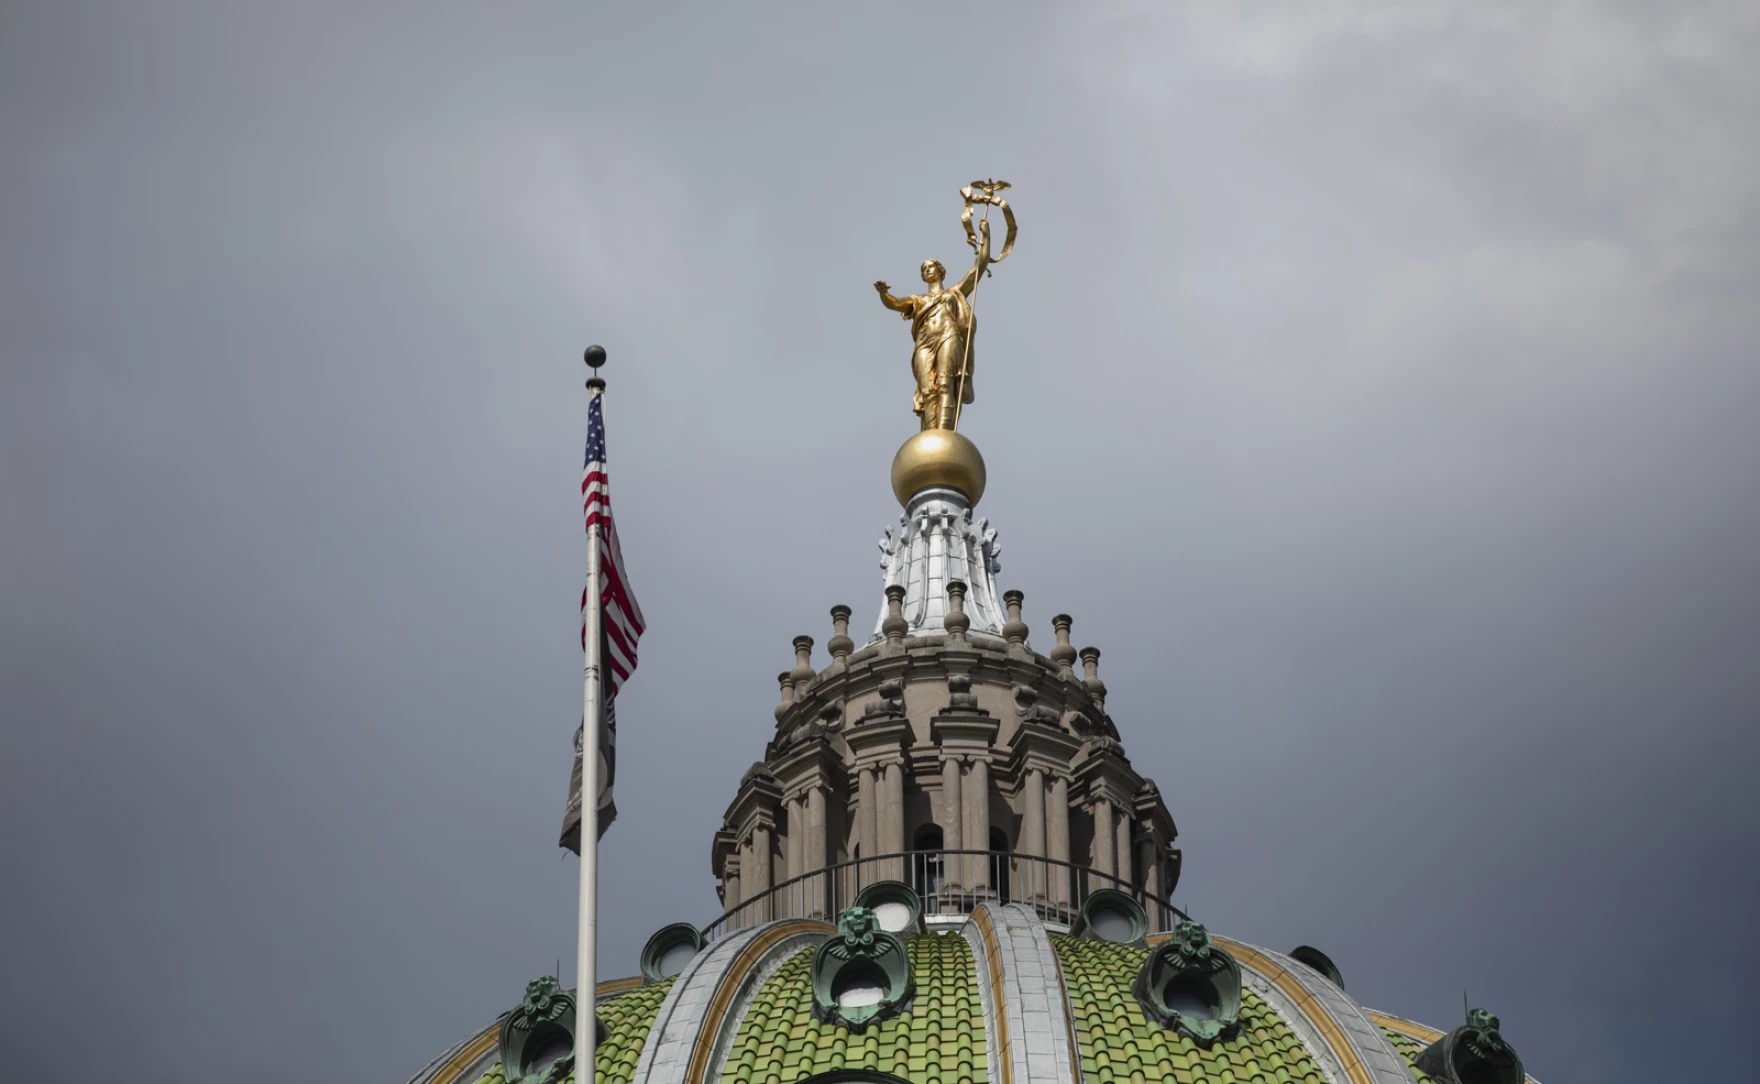 Close up of the gold statue atop the state capitol building in Harrisburg PA.